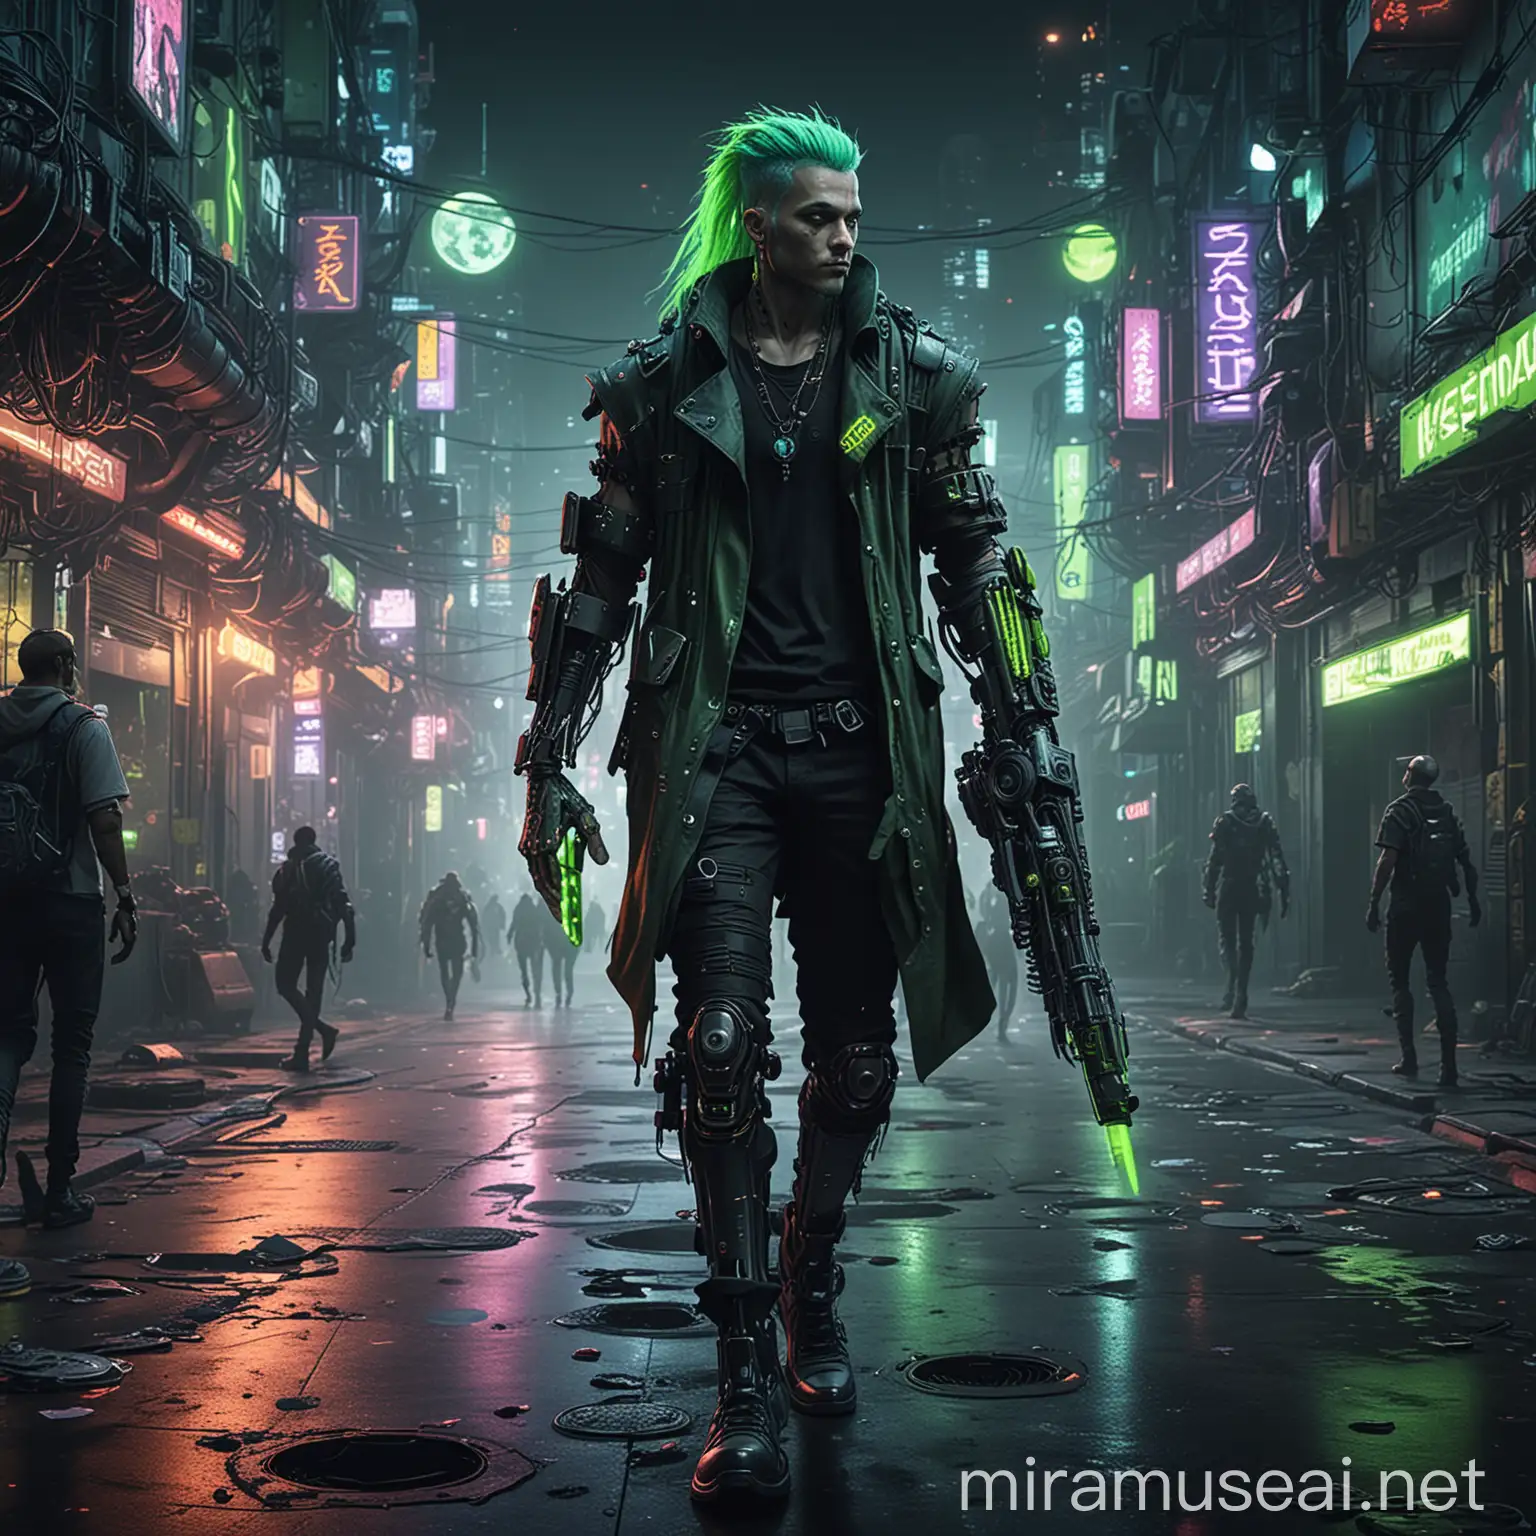 A man walking through a night city, in cyberpunk style. He has long neon green hair and a robotic arm, and in the other he holds planets